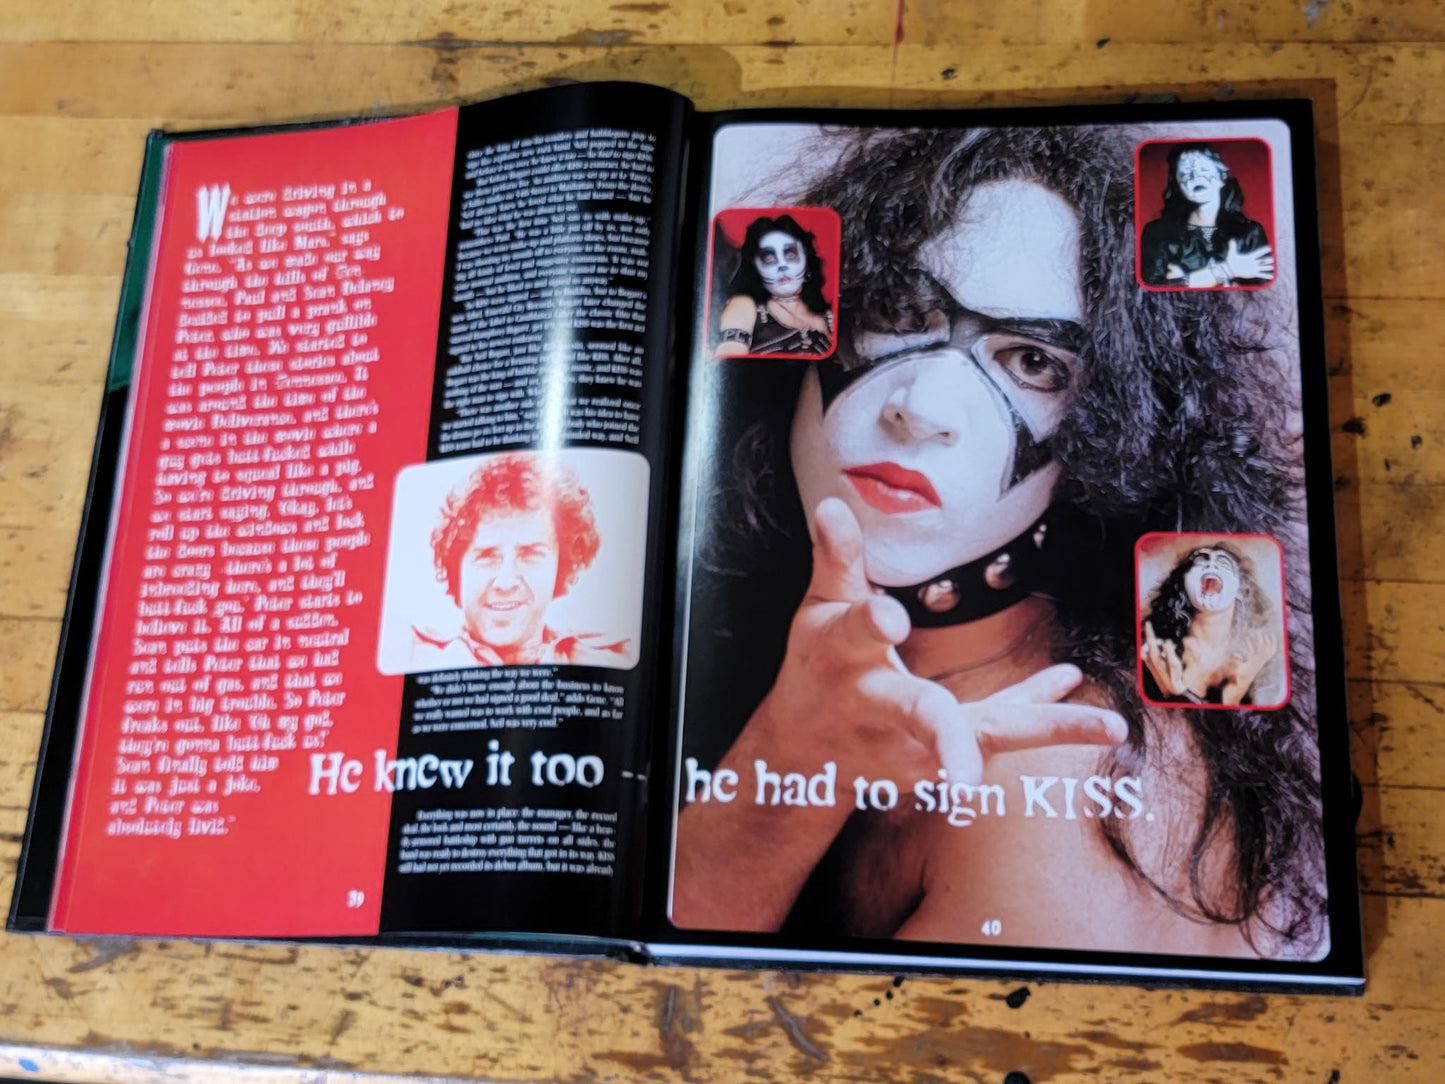 Kisstory Book Signed by the Band